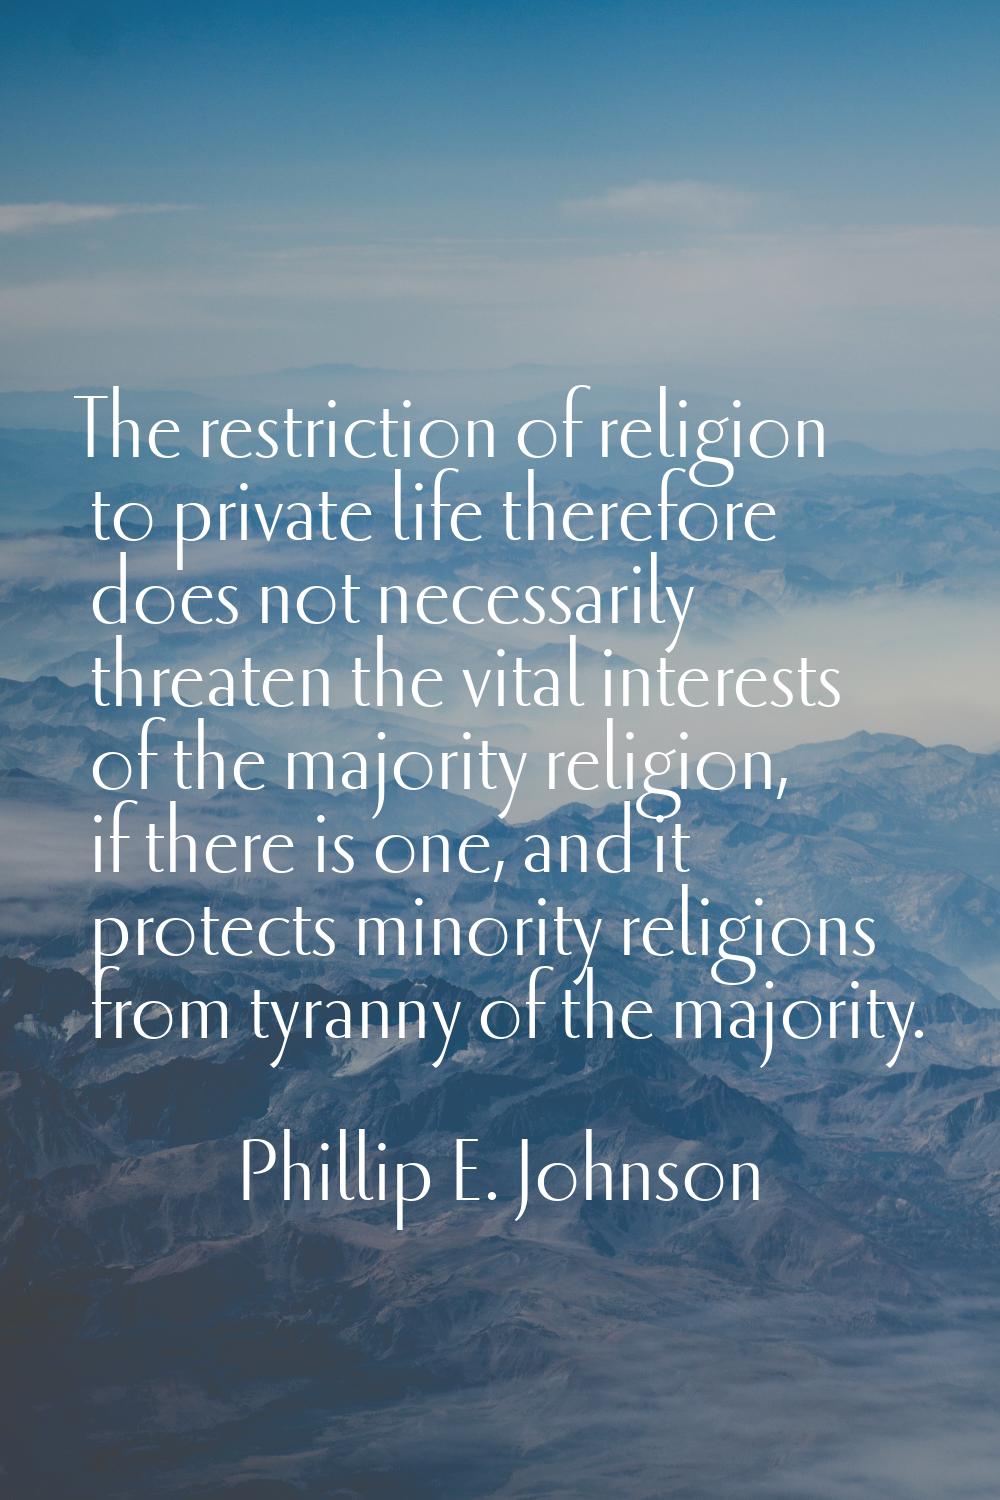 The restriction of religion to private life therefore does not necessarily threaten the vital inter